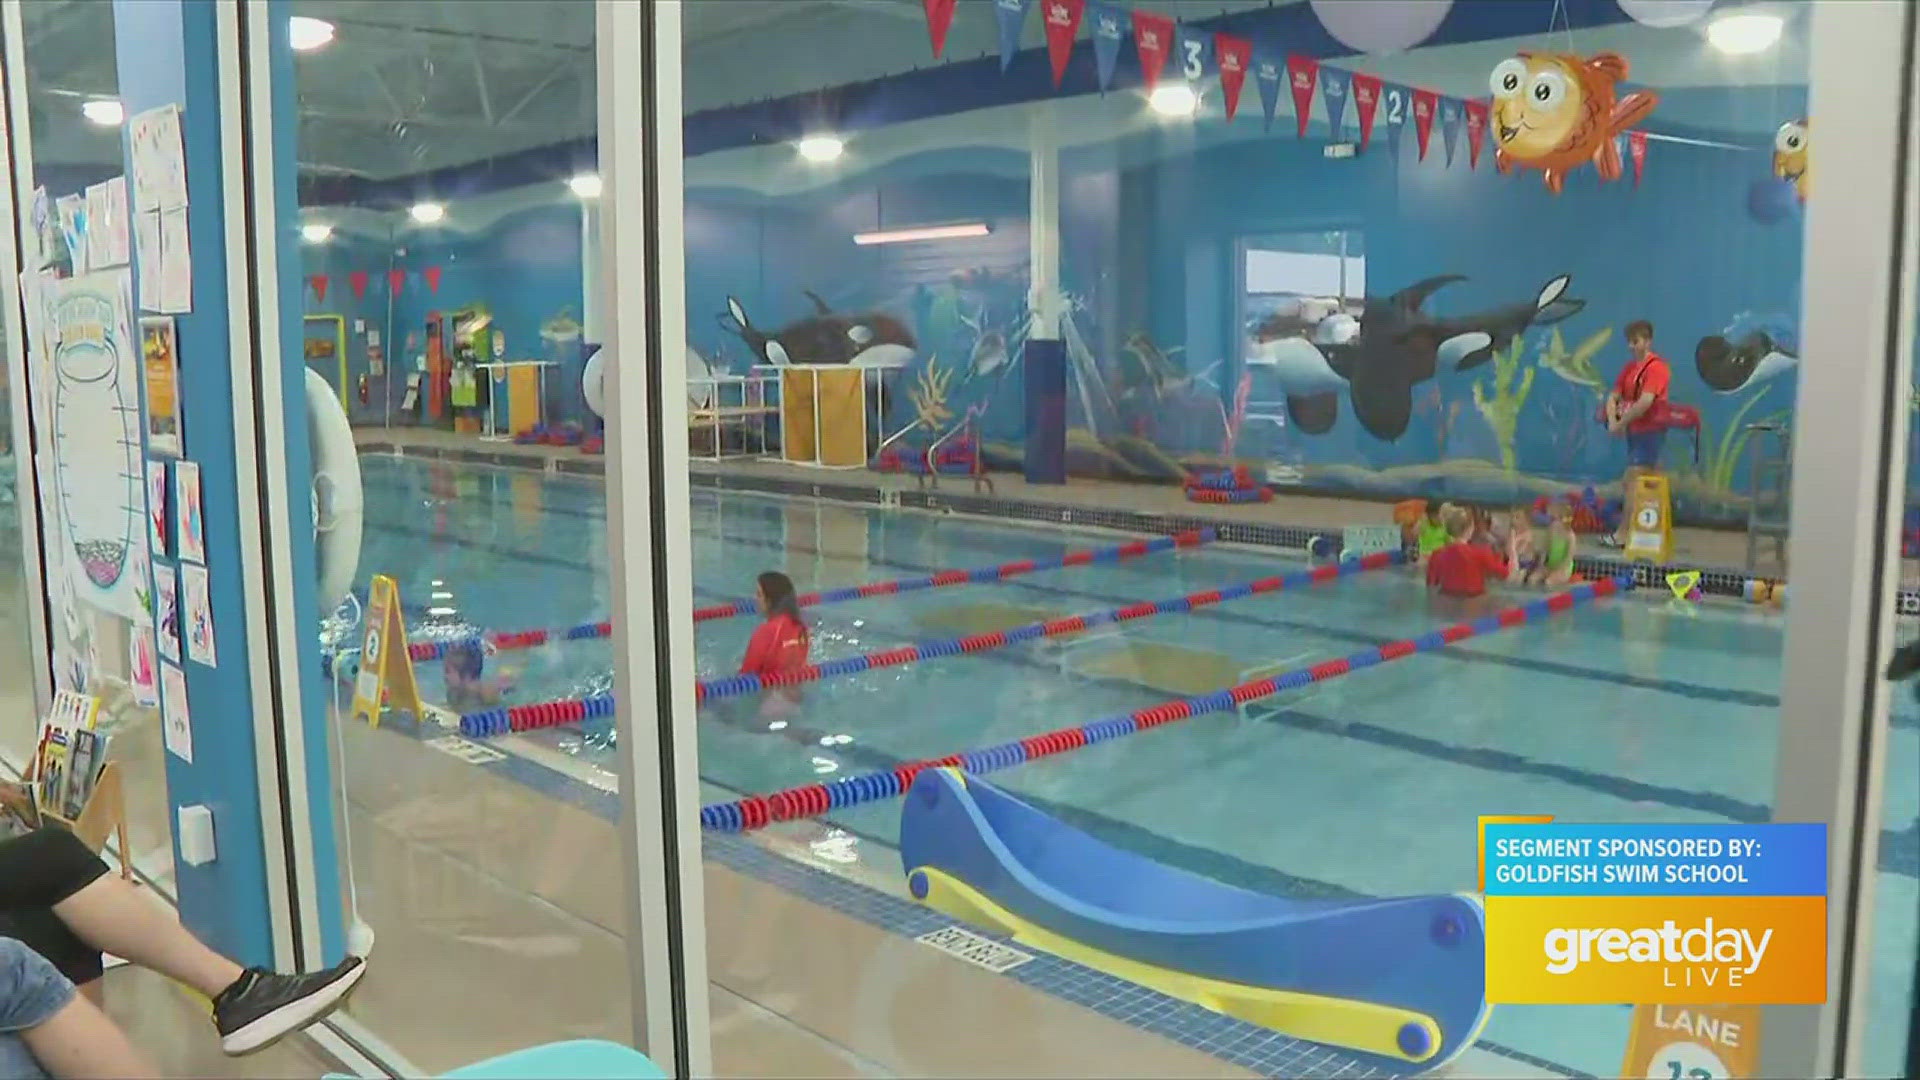 Goldfish Swim School discusses the importance of swim lessons for children and how the lessons can prevent accidents.